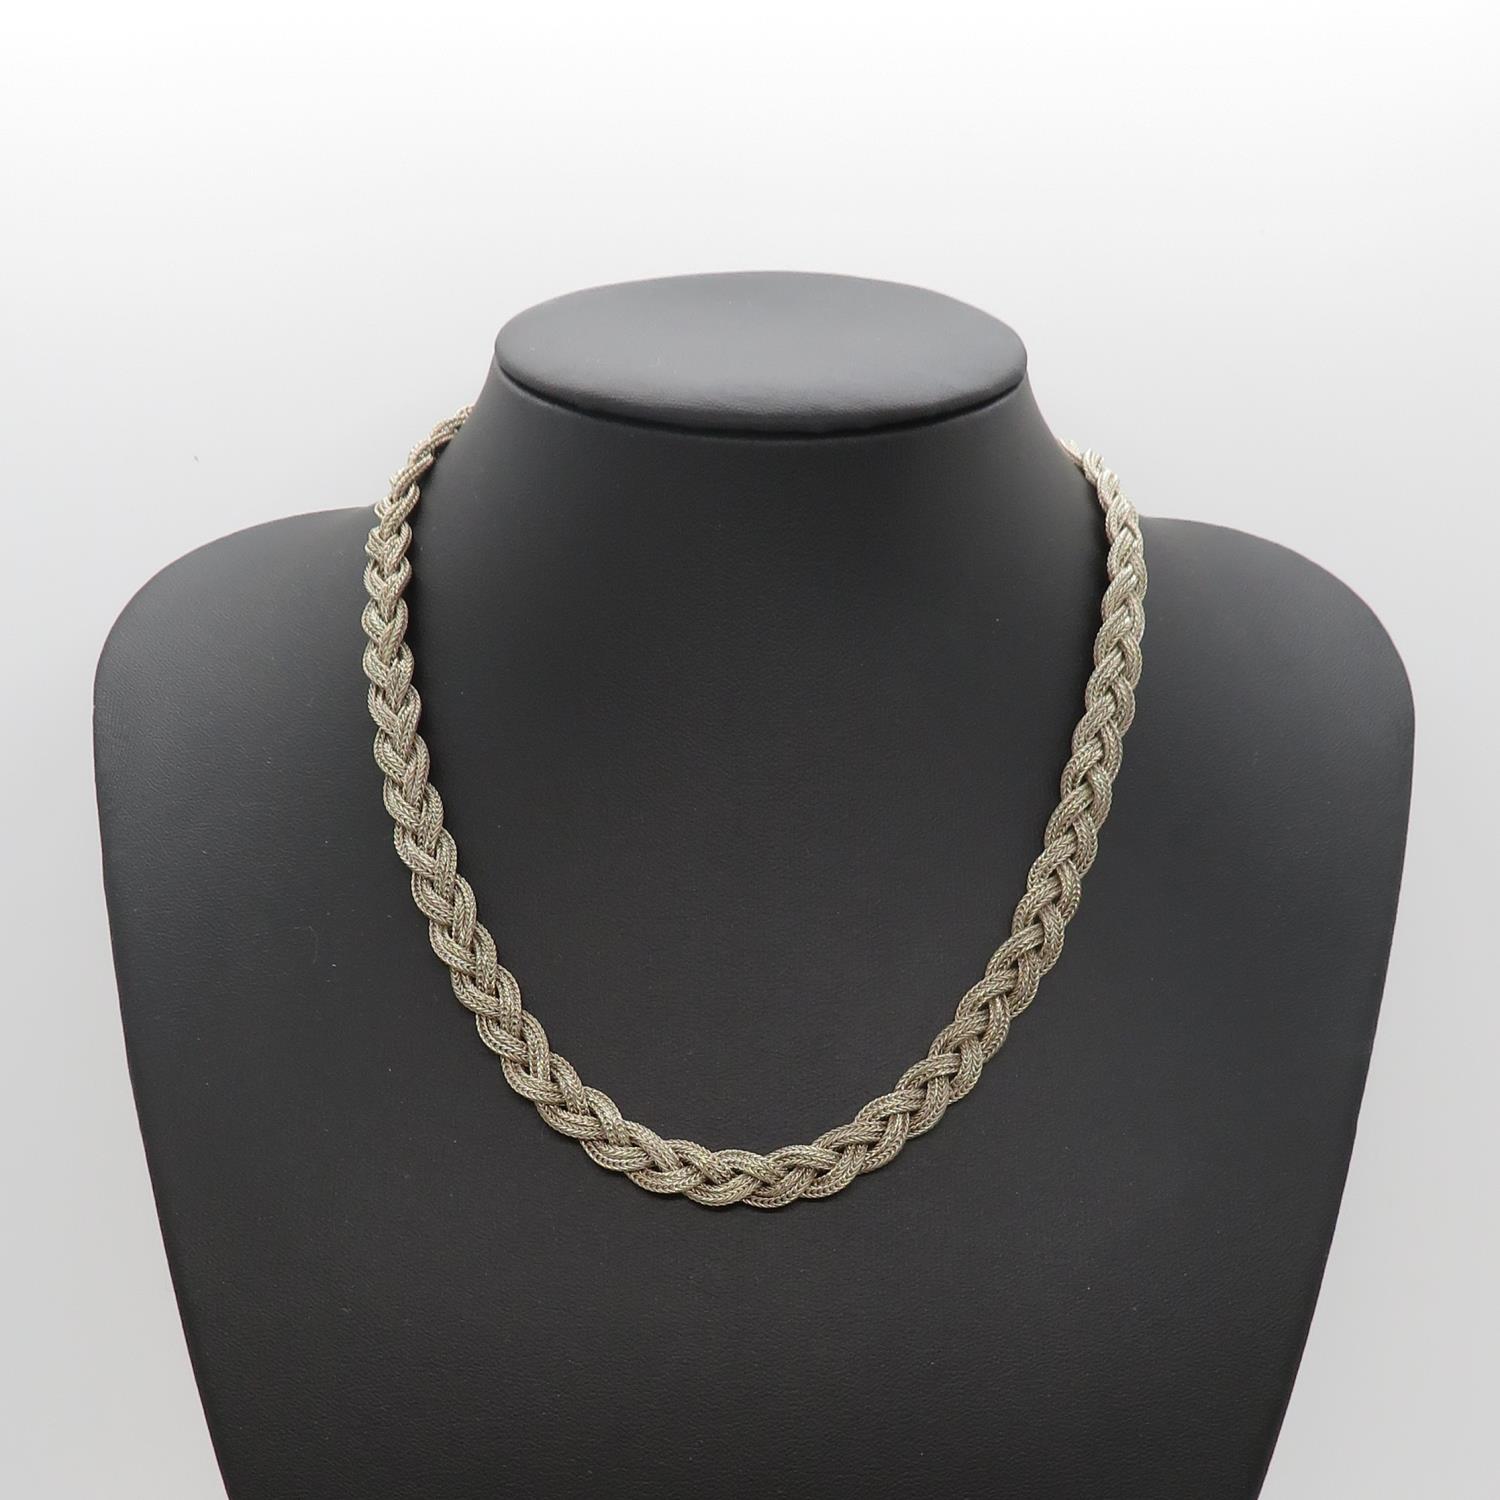 HM silver rope necklace 18" 26g